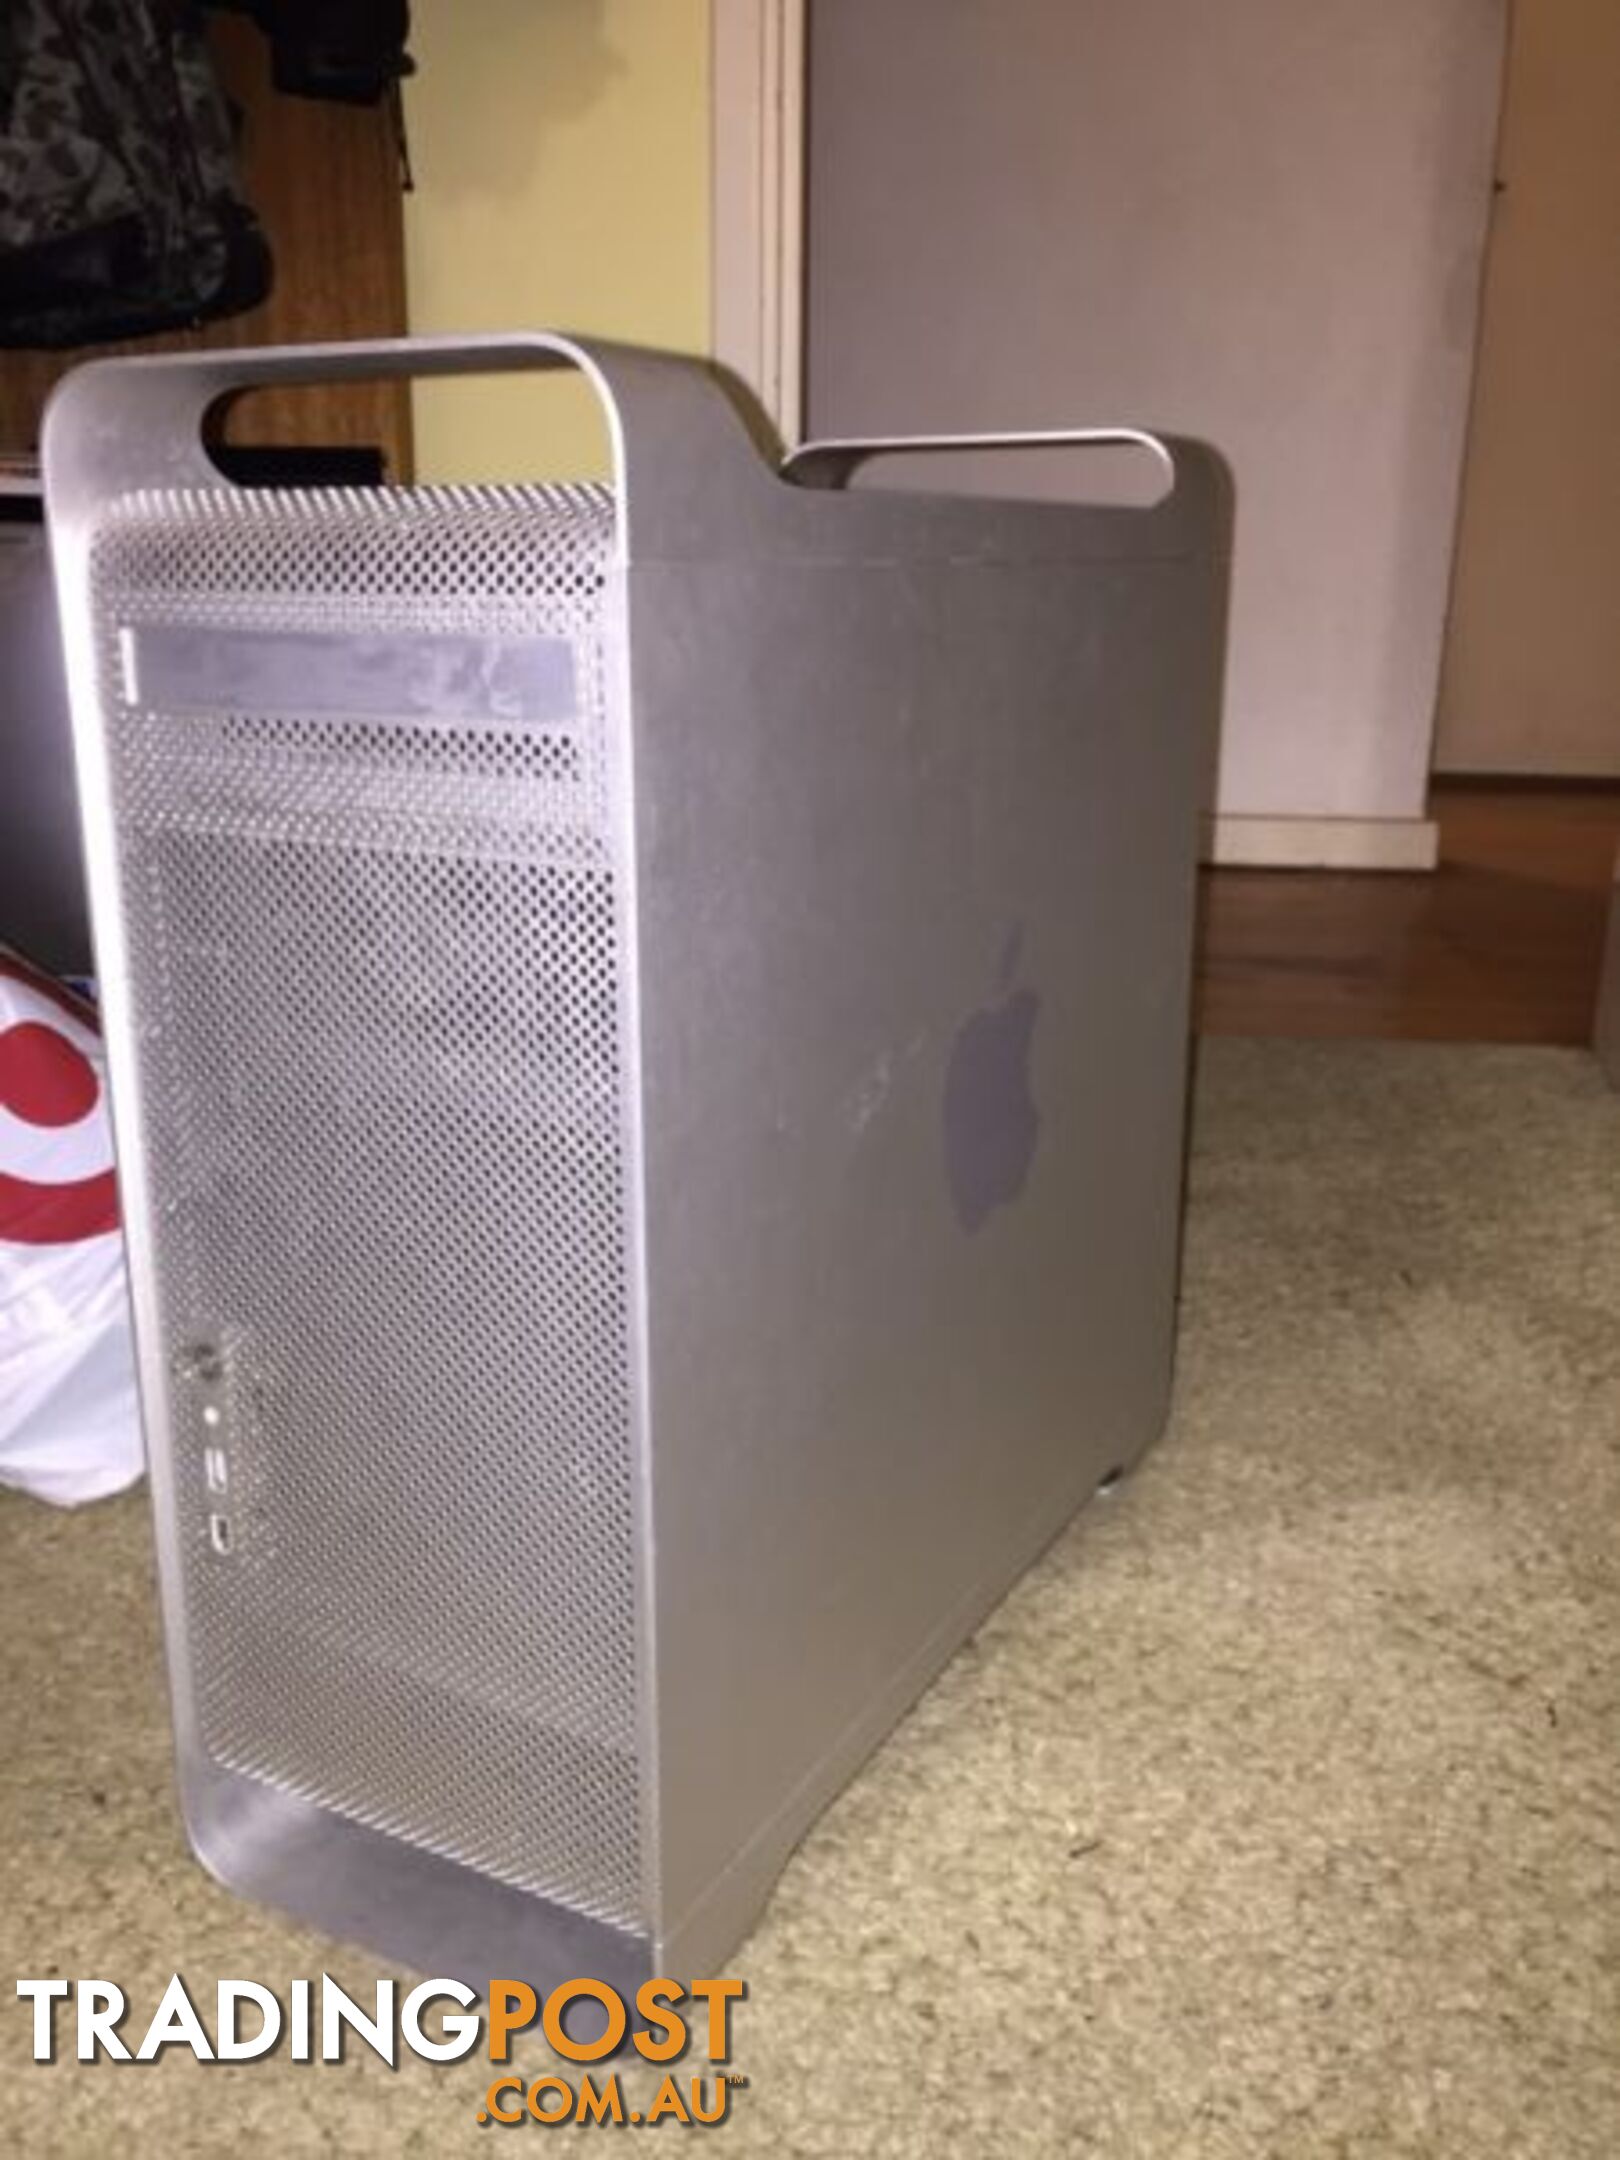 Apple Mac G5 / awesome case